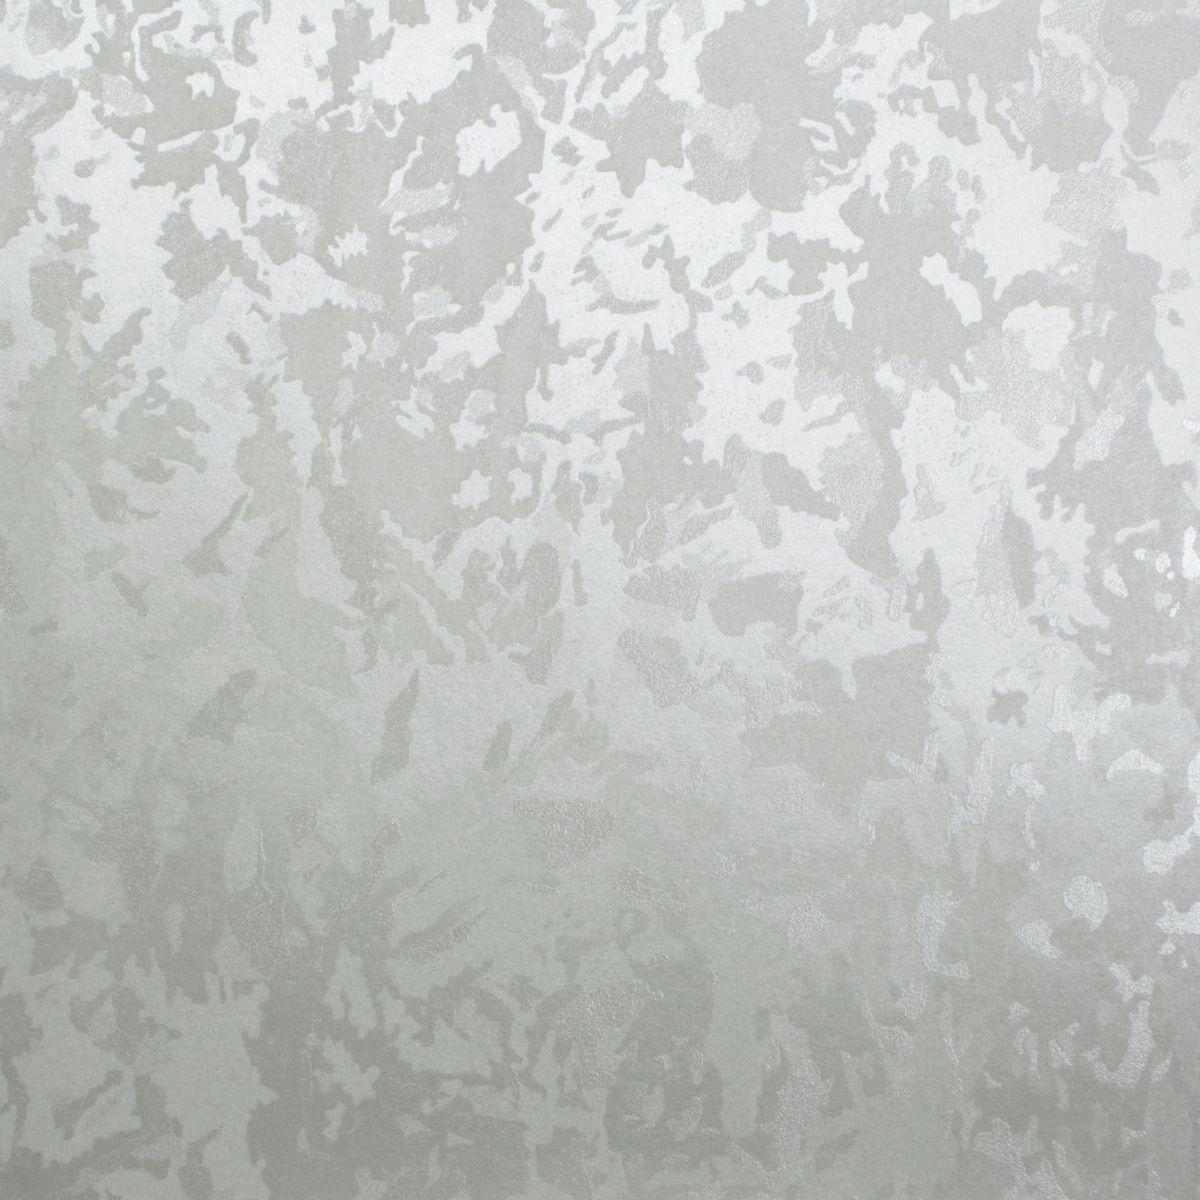 High Quality Wallpaper And Fabrics. Non Woven Satin